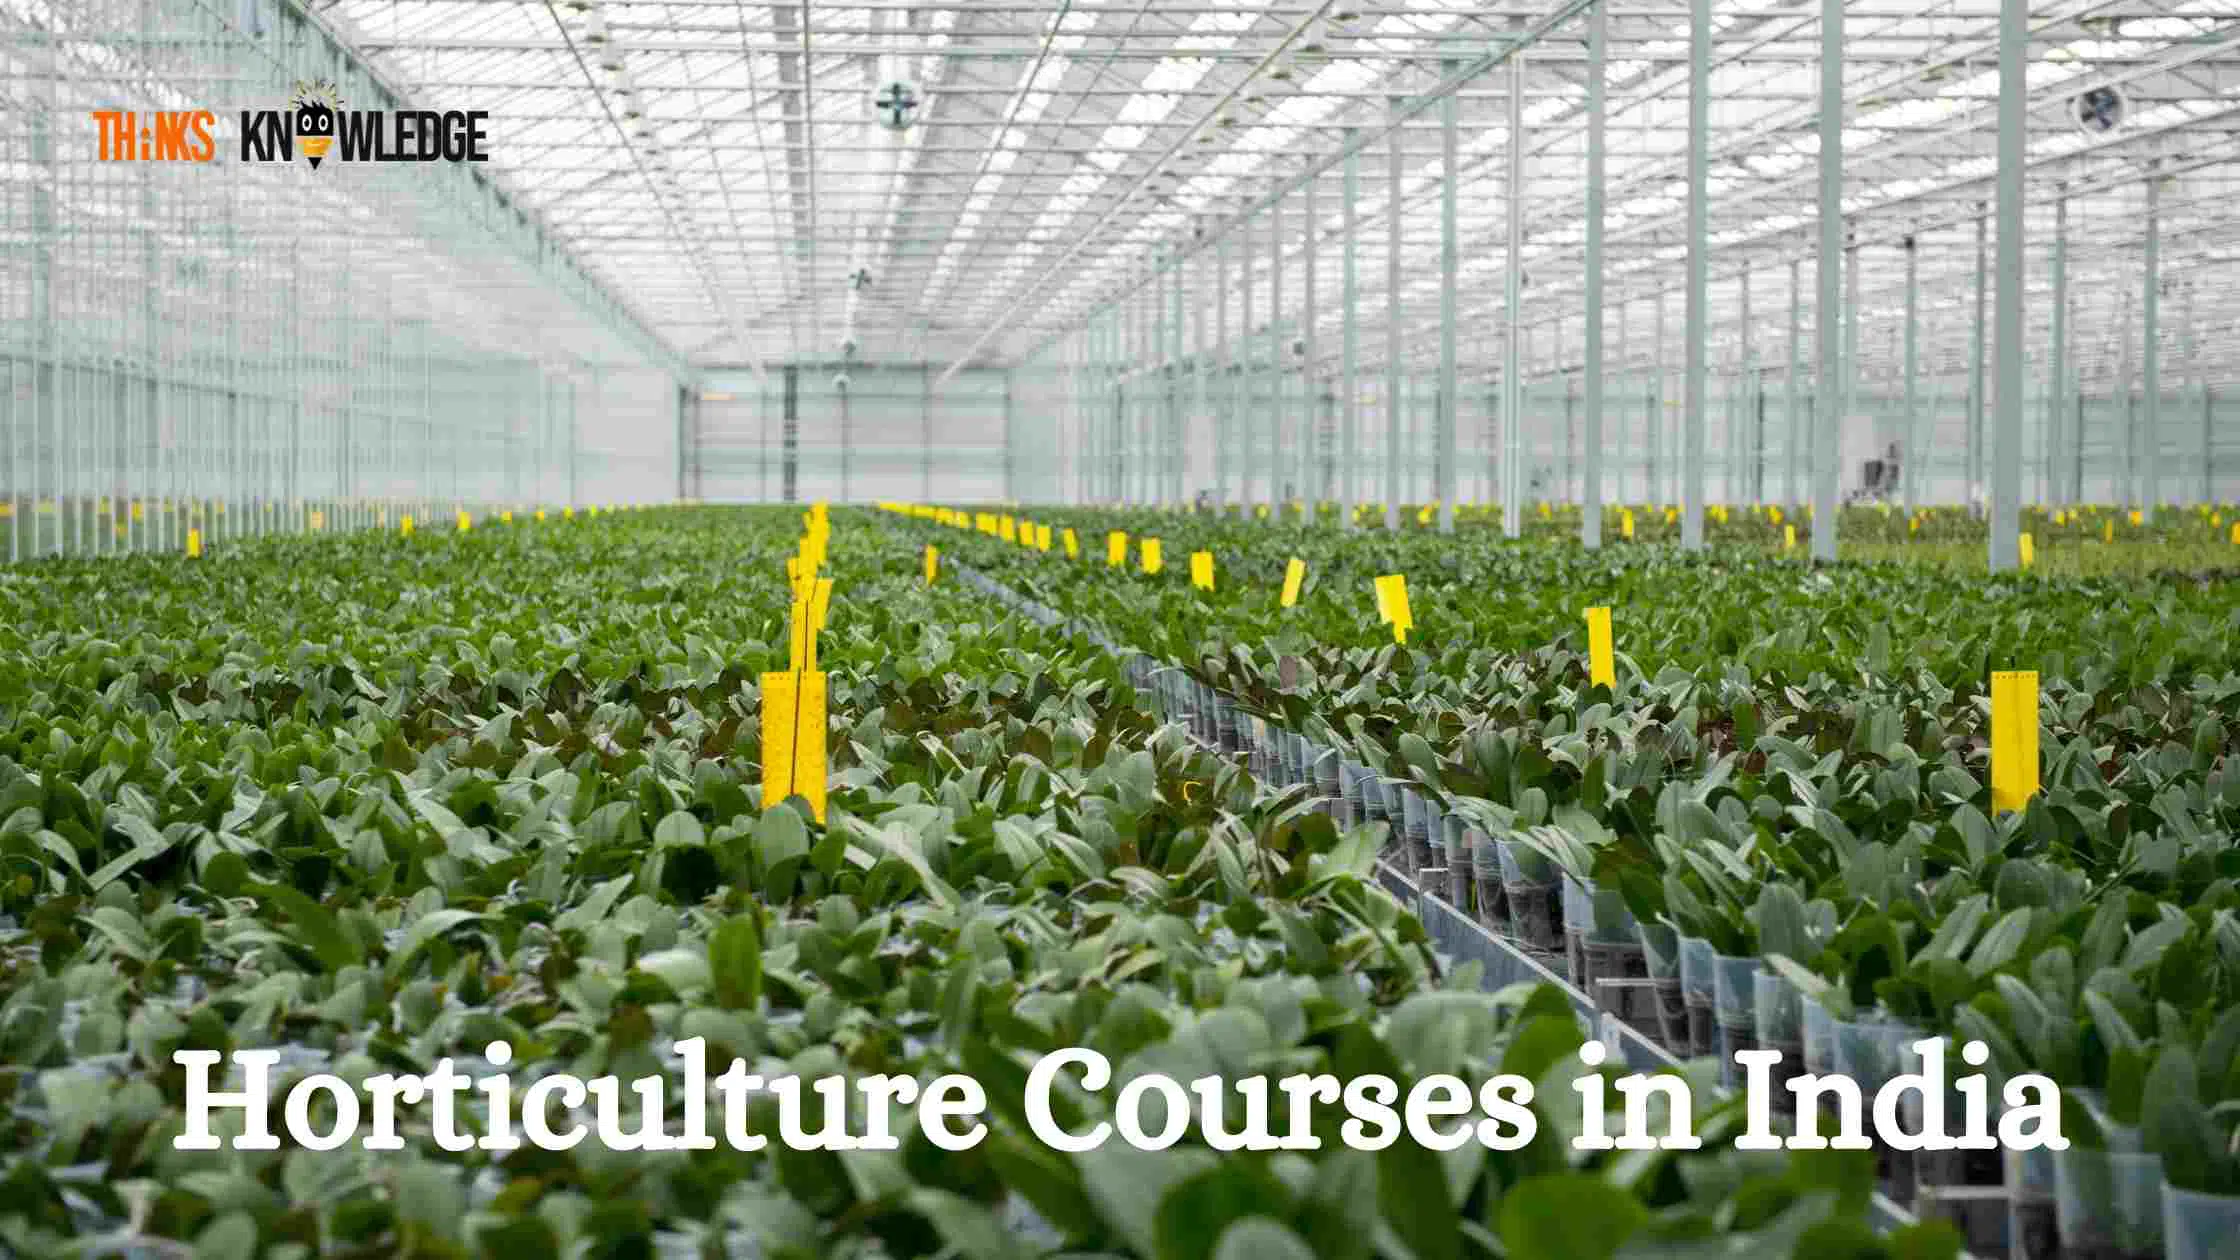 Horticulture Courses